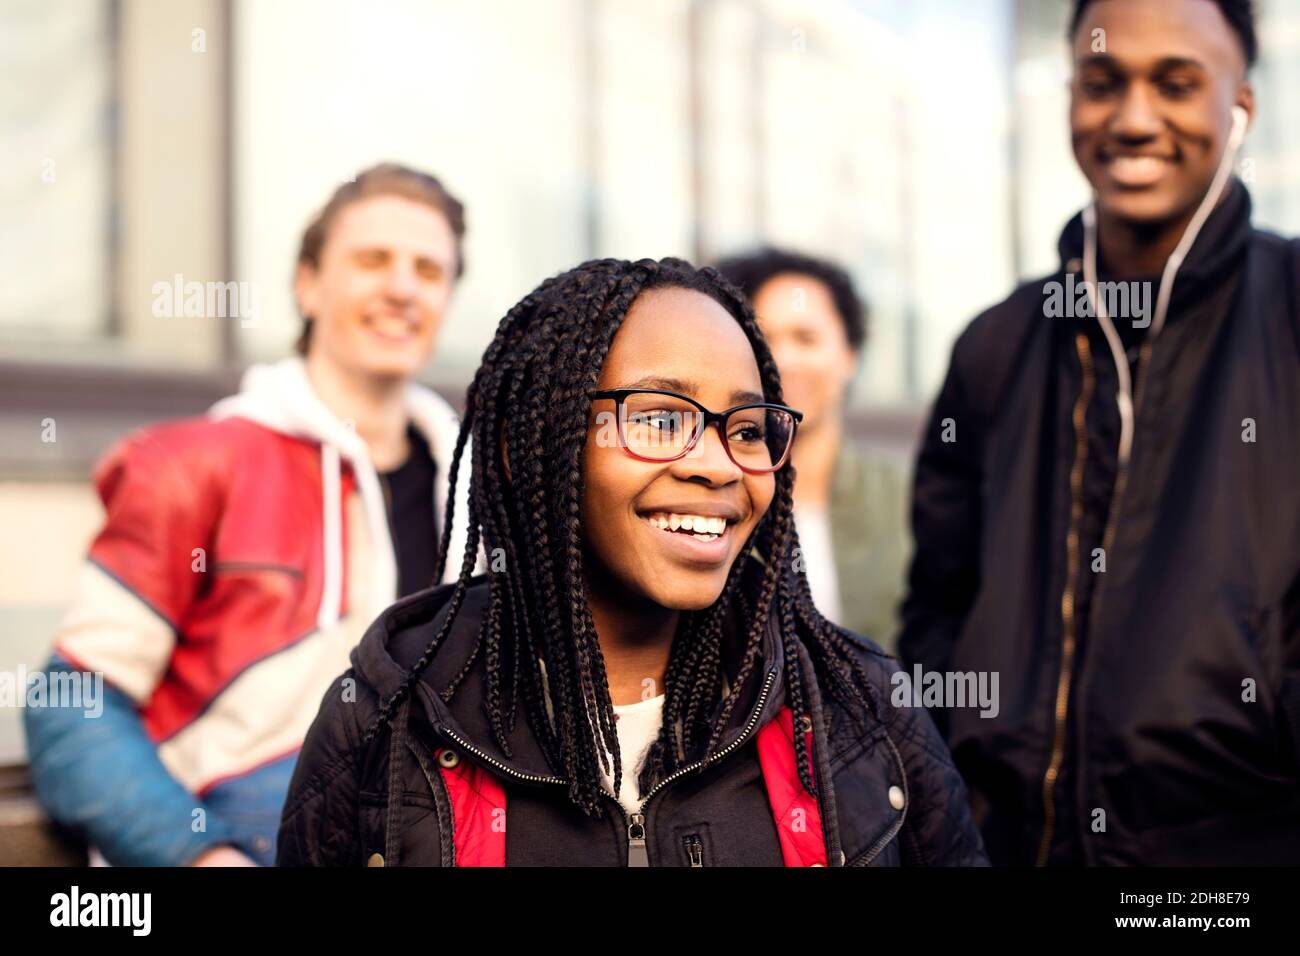 Smiling teenager with braided hair wearing eyeglasses standing against friends in city Stock Photo